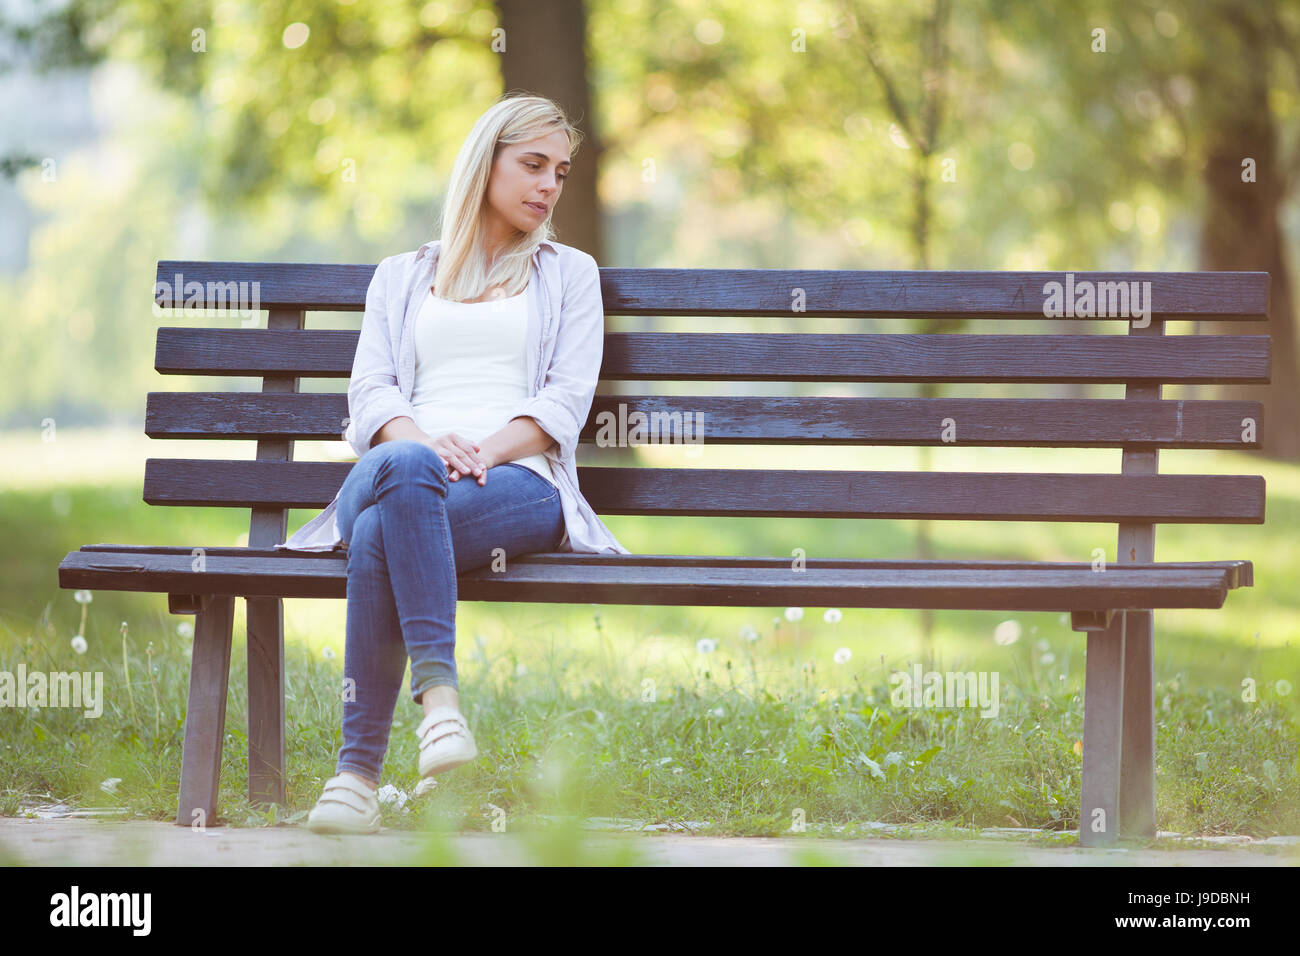 Lonely woman sitting in park in despair. Stock Photo